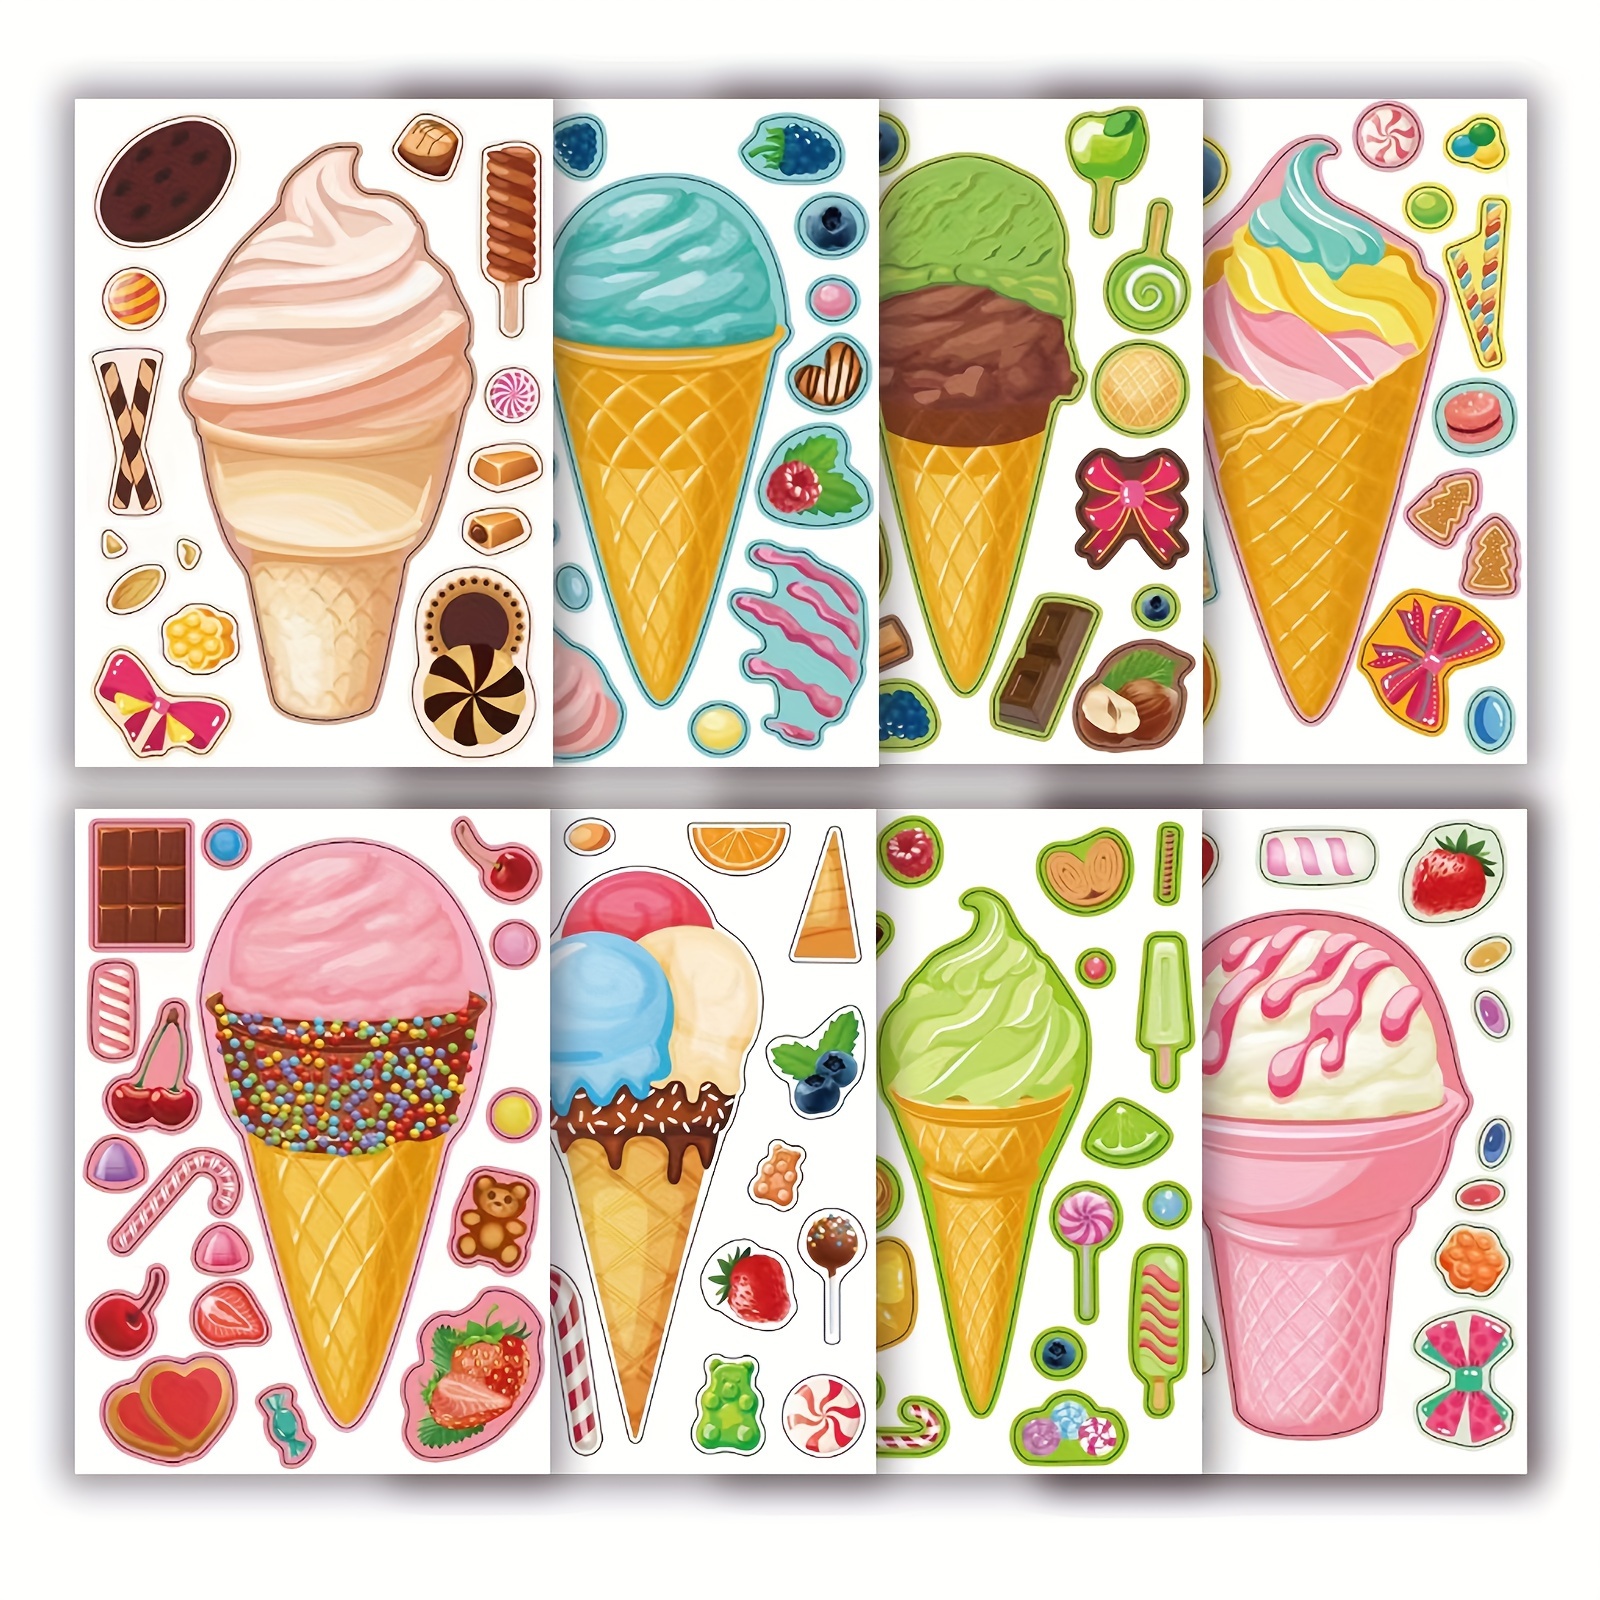 

8 Sheets Cute Ice Cream Puzzle Stickers, Cartoon Diy Stickers, For Water Cup Refrigerator Book Luggage Table Helmet Skateboard Camera Guitar Laptop